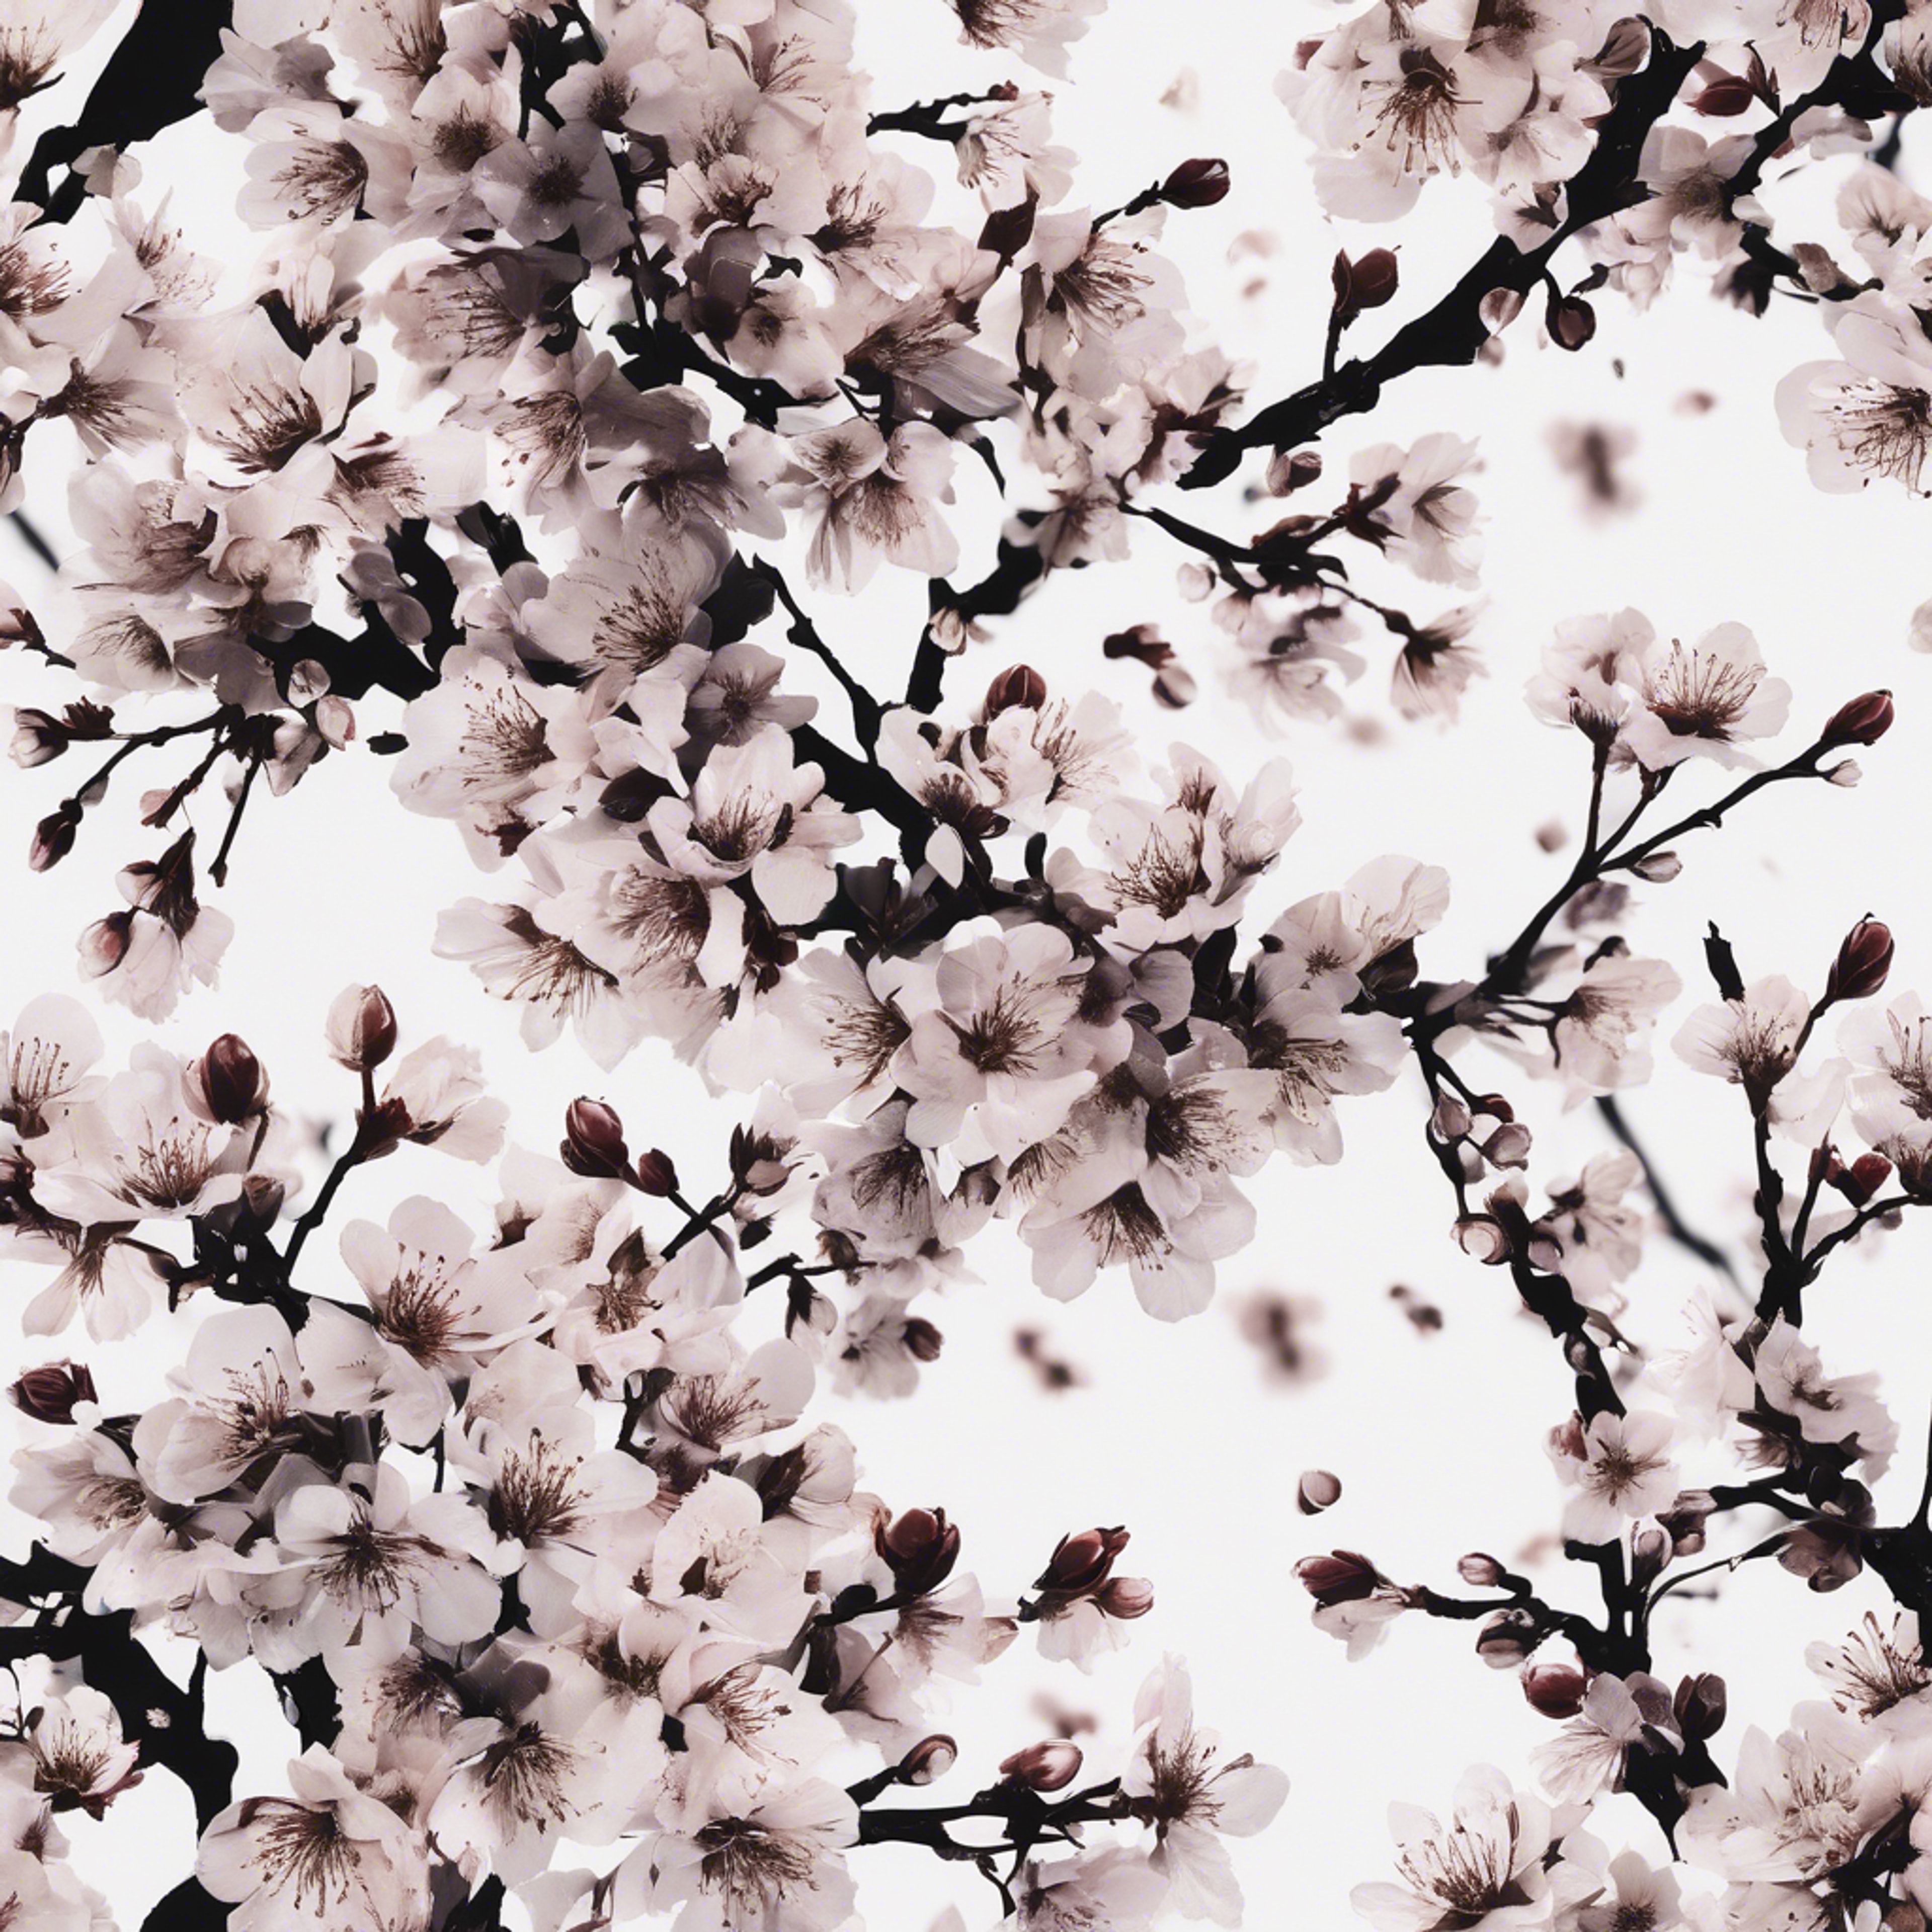 Black silhouettes of cherry blossoms strewn on a seamless white fabric pattern.壁紙[c0249a9a759e41bf8f01]